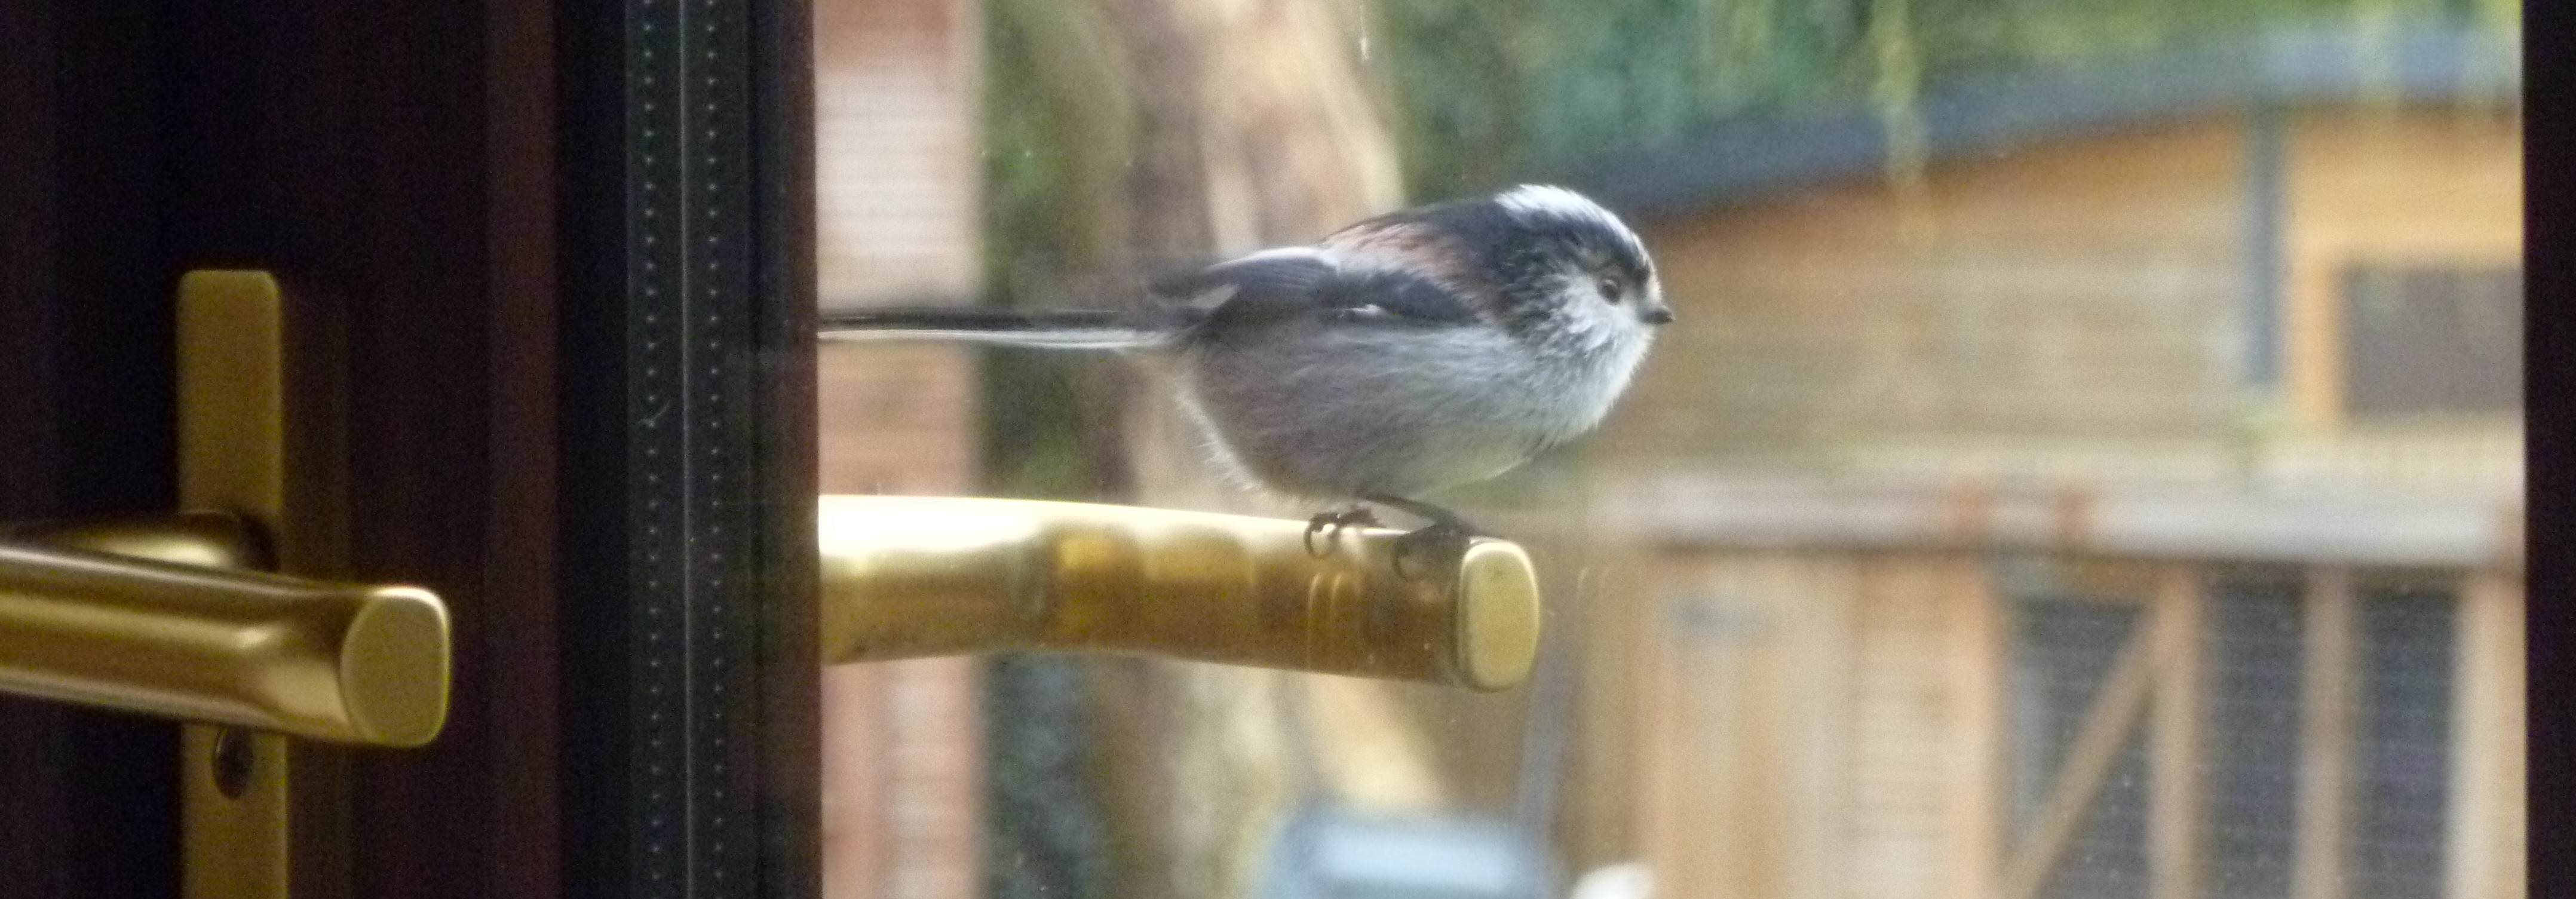 A long tailed tit on a door handle